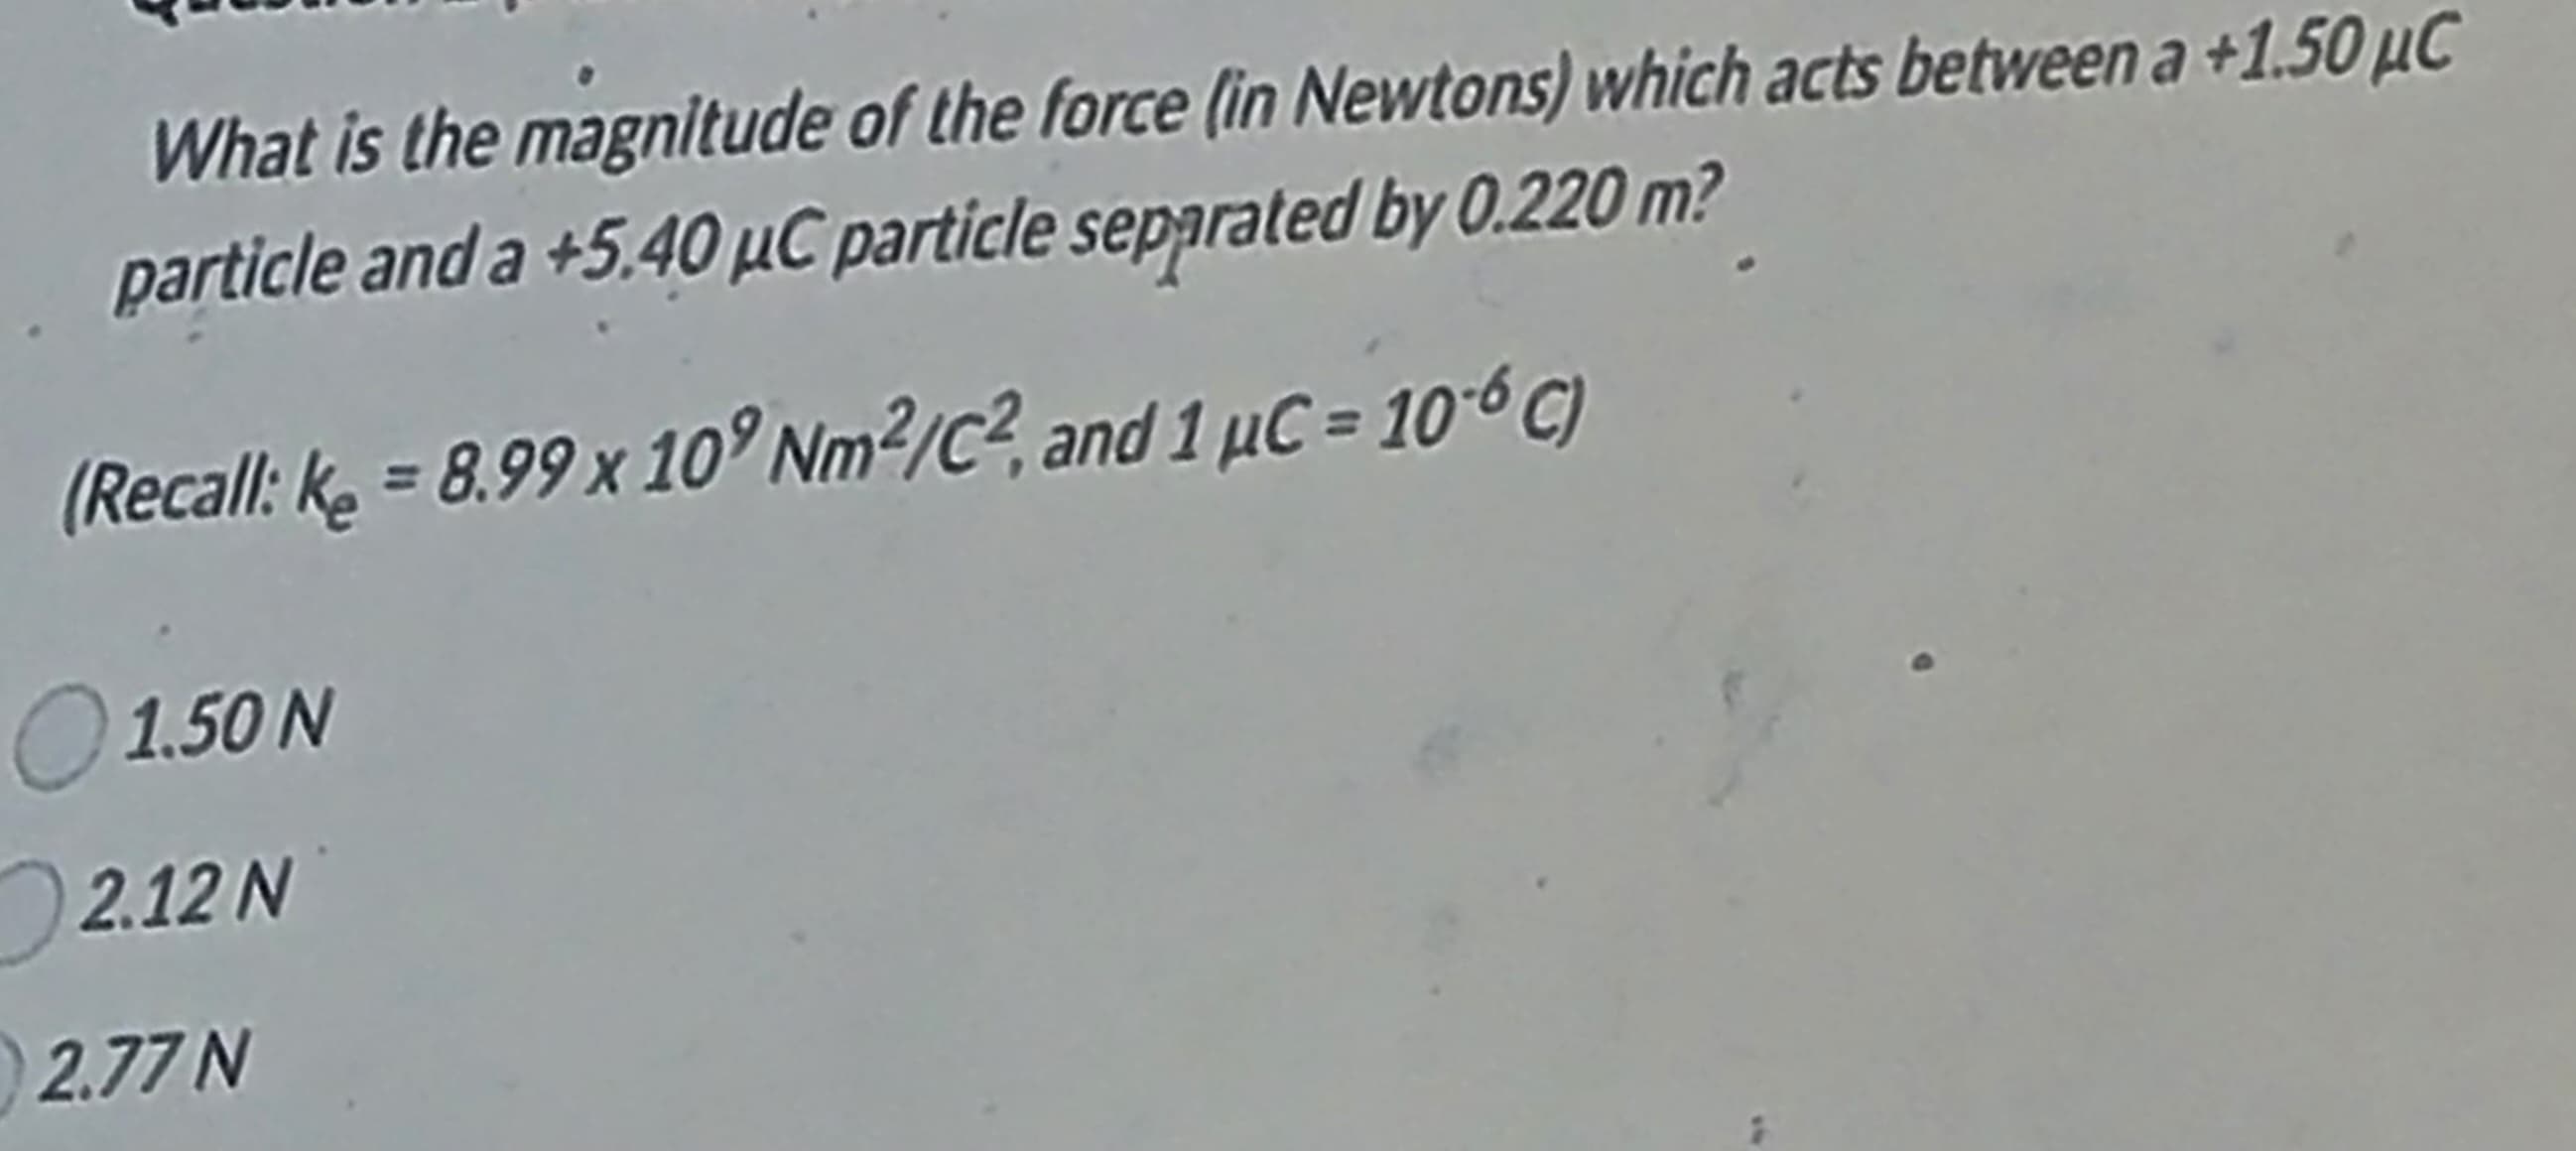 What is the magnitude of the force (in Newtons) which acts between a +1.50 μC
particle and a +5.40 μC particle separated by 0.220 m?
(Recall: k₂ = 8.99 x 109 Nm²/C², and 1 μC = 106 C)
○ 1.50 N
2.12 N
2.77 N
1